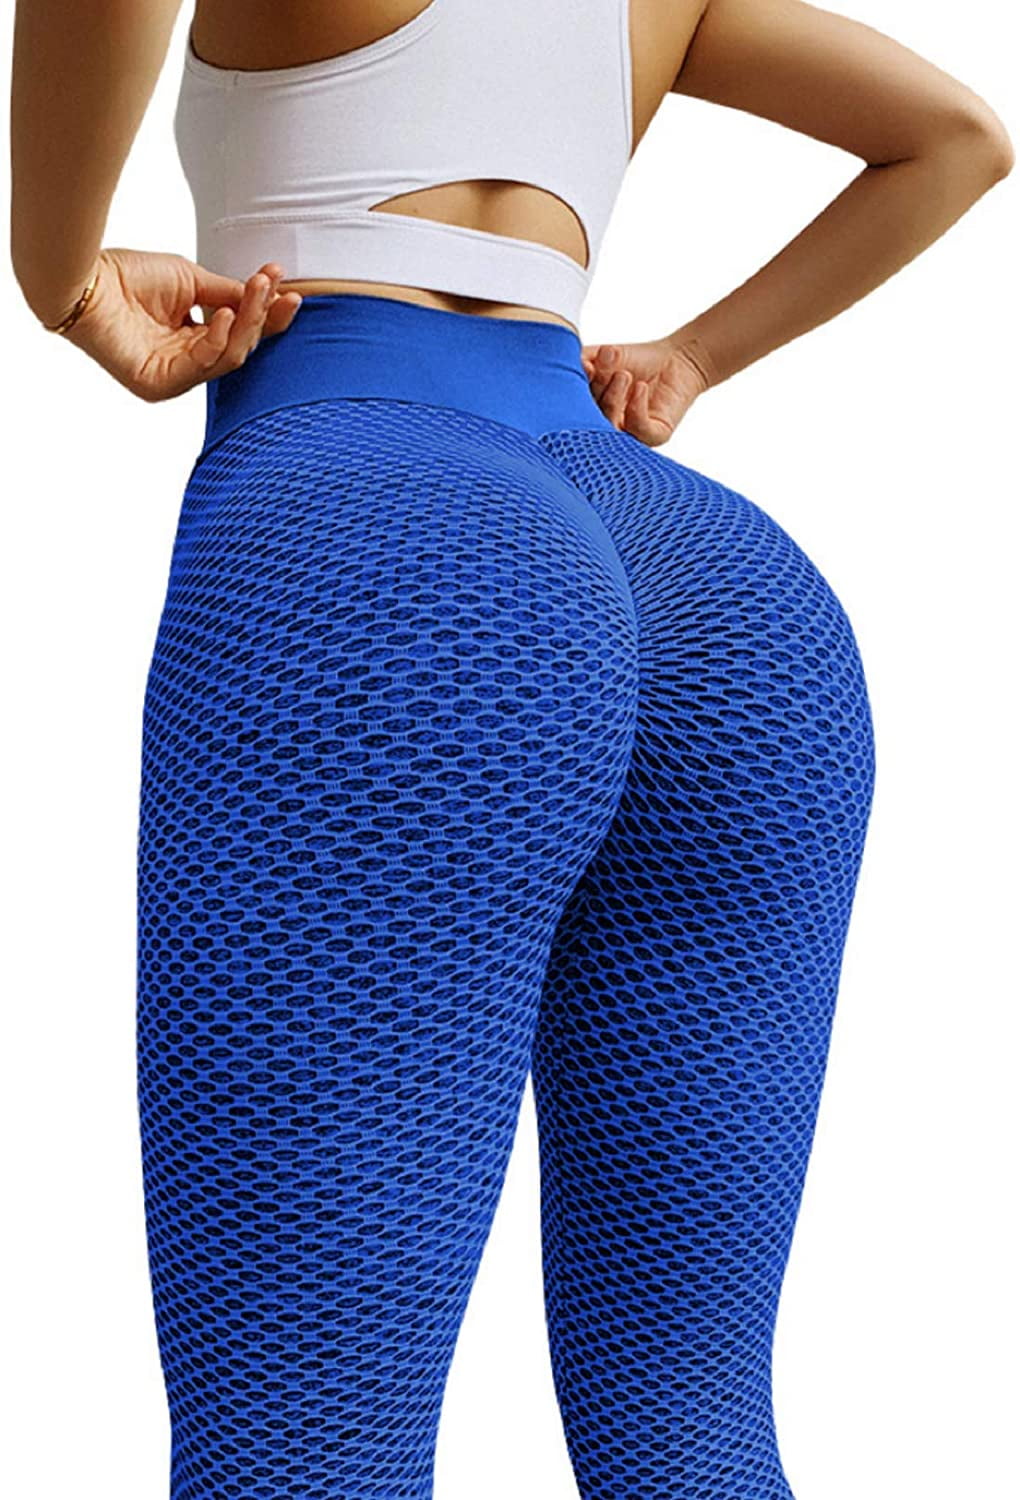 Womens Wrinkled Butt Lifted High Waist Yoga Pants Belly Control